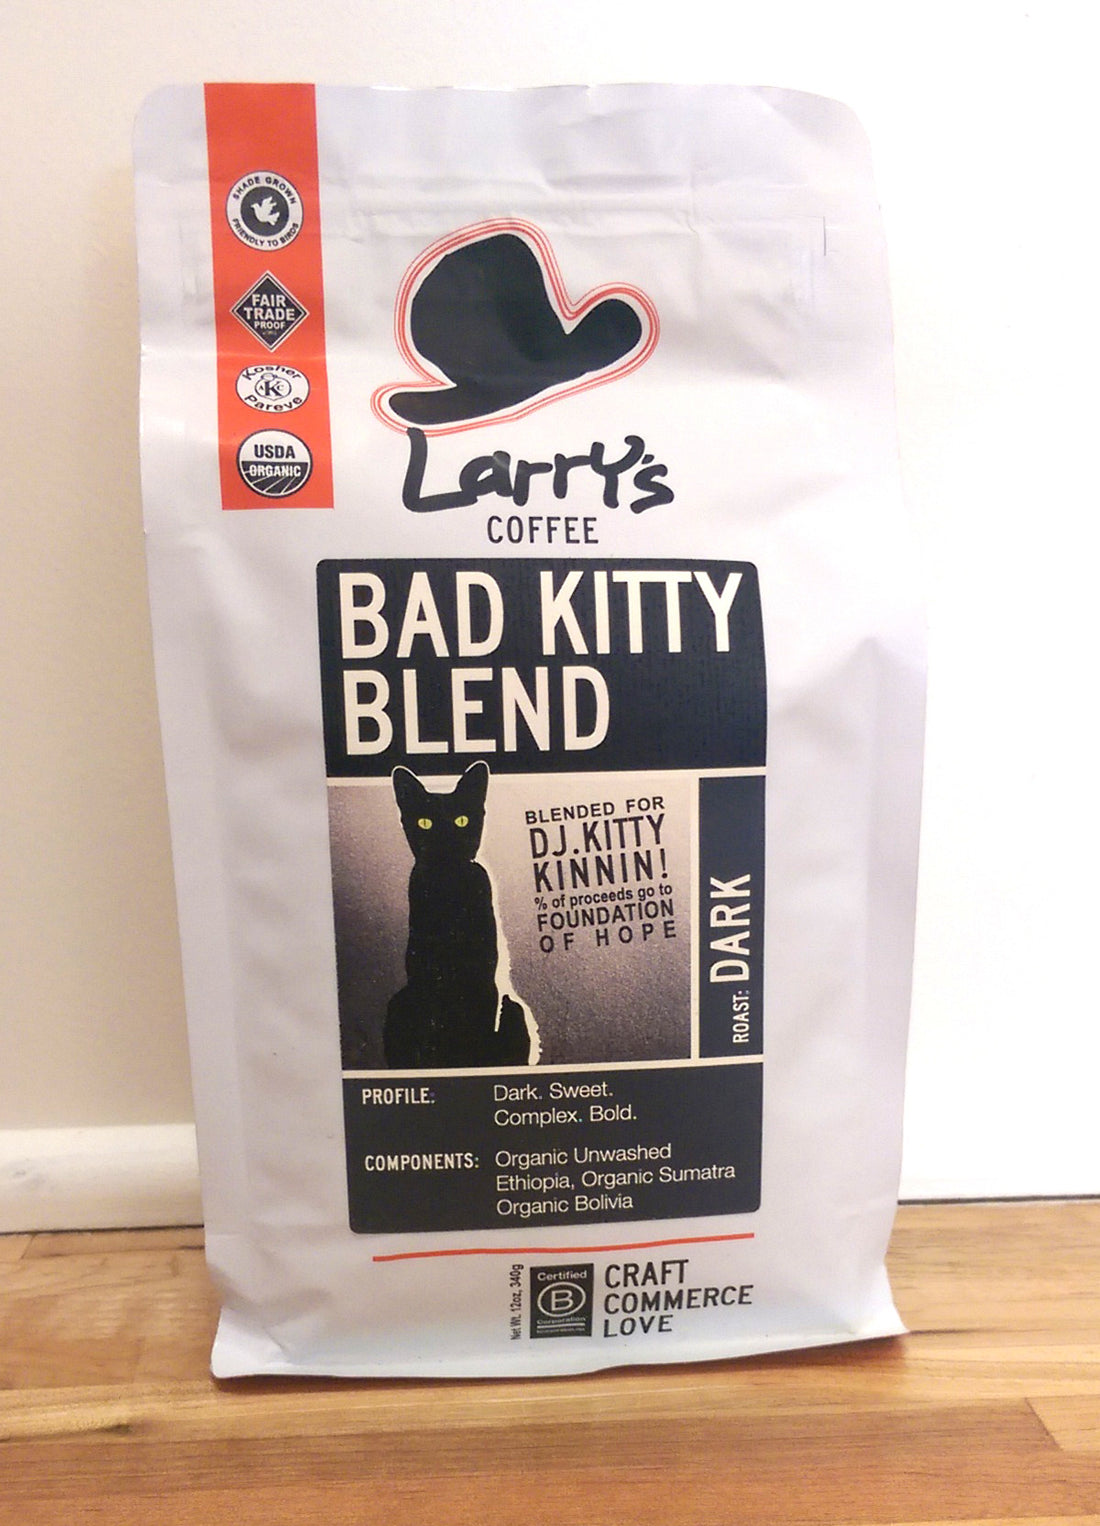 Have you tried Raleigh's Larry's Coffee?